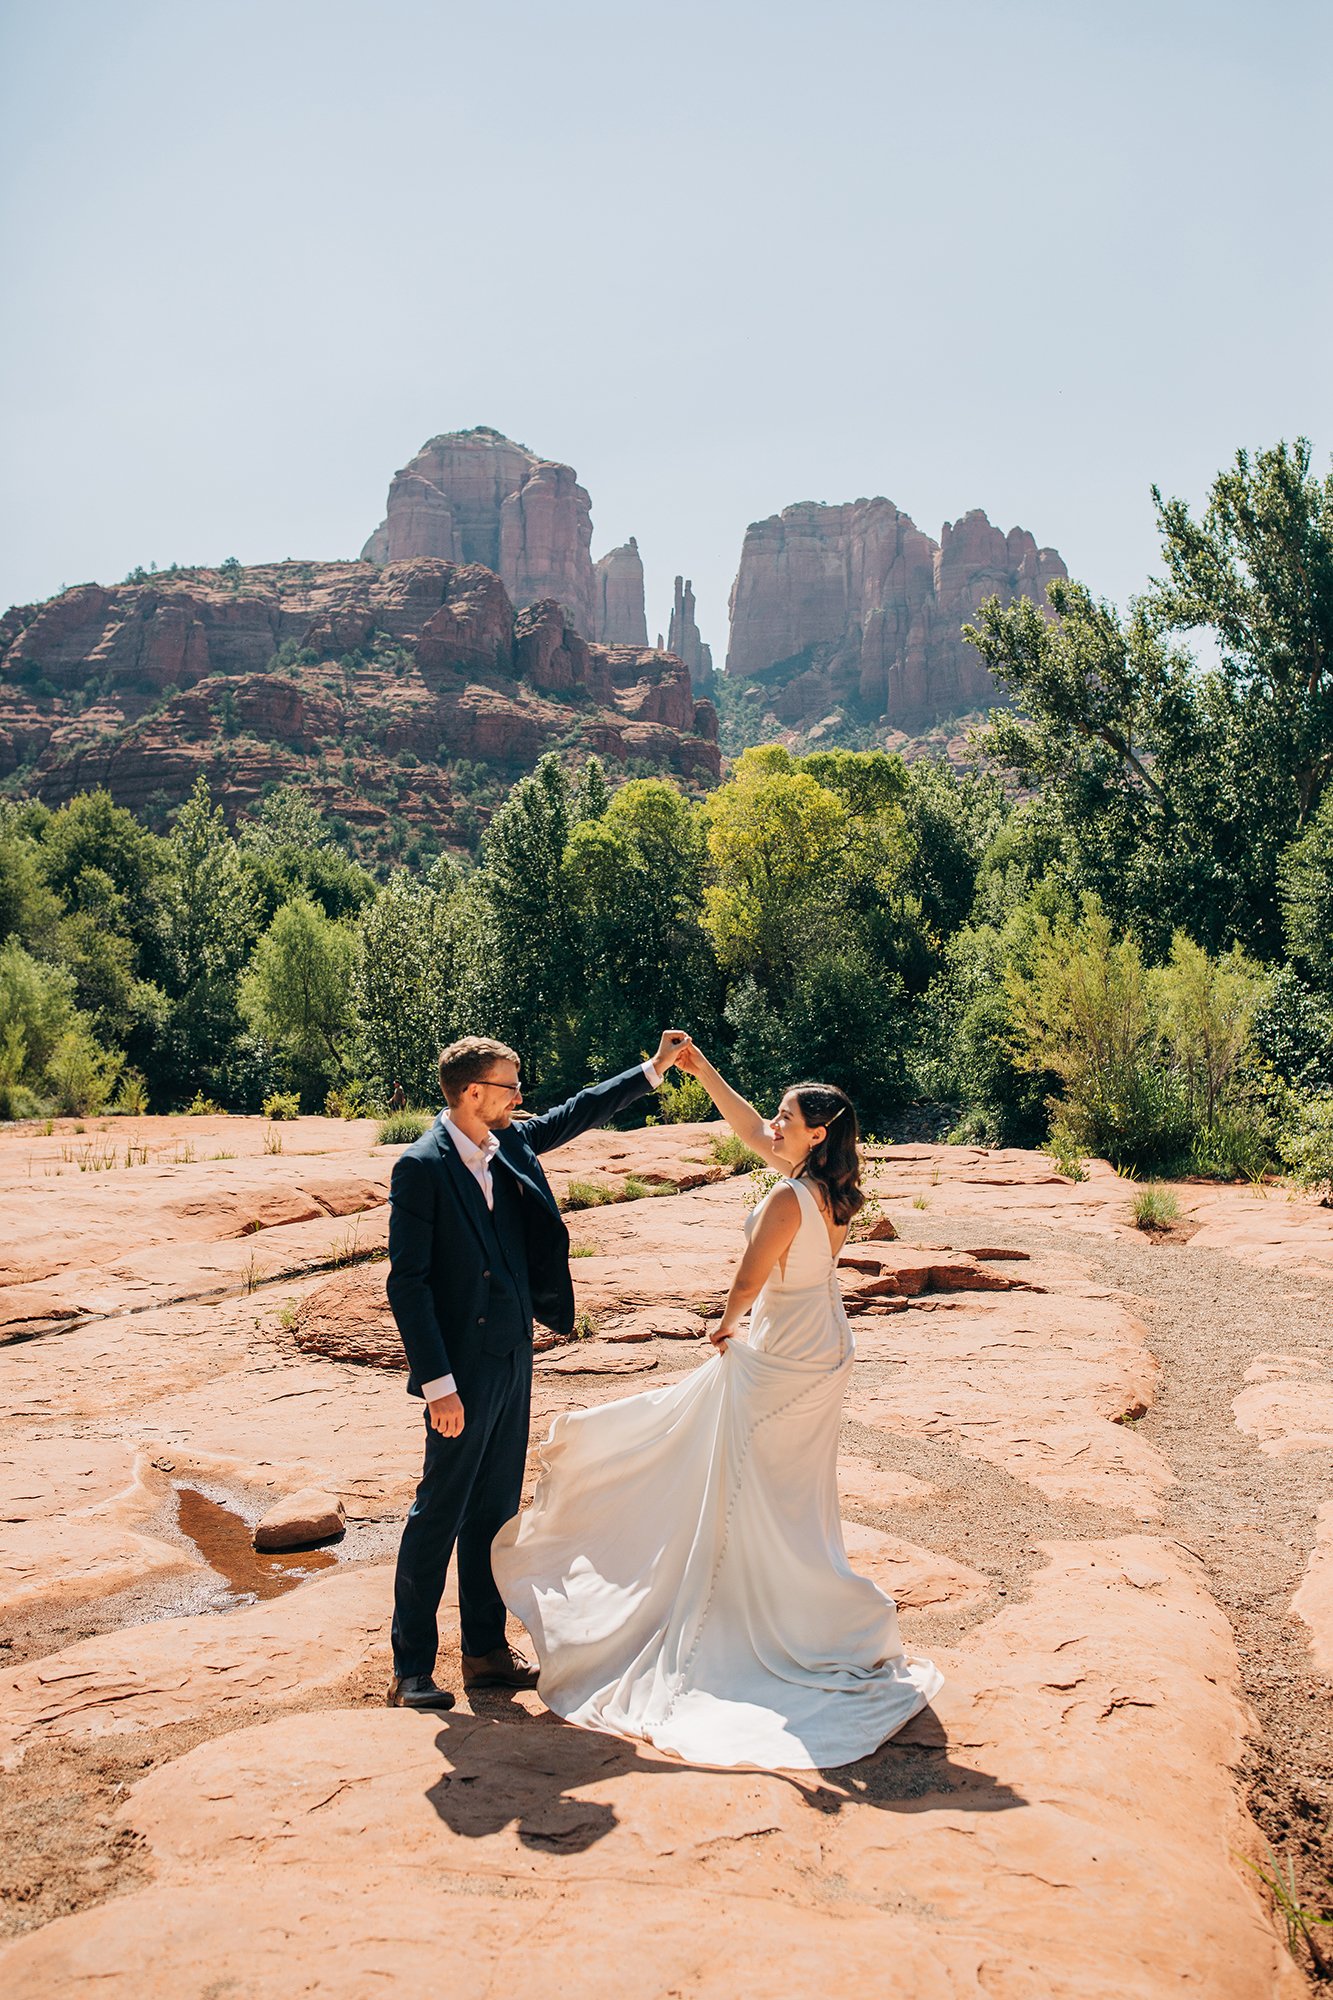 Stephanie and Matthew dance together in their wedding attire, with Sedona cliffs and trees in the background